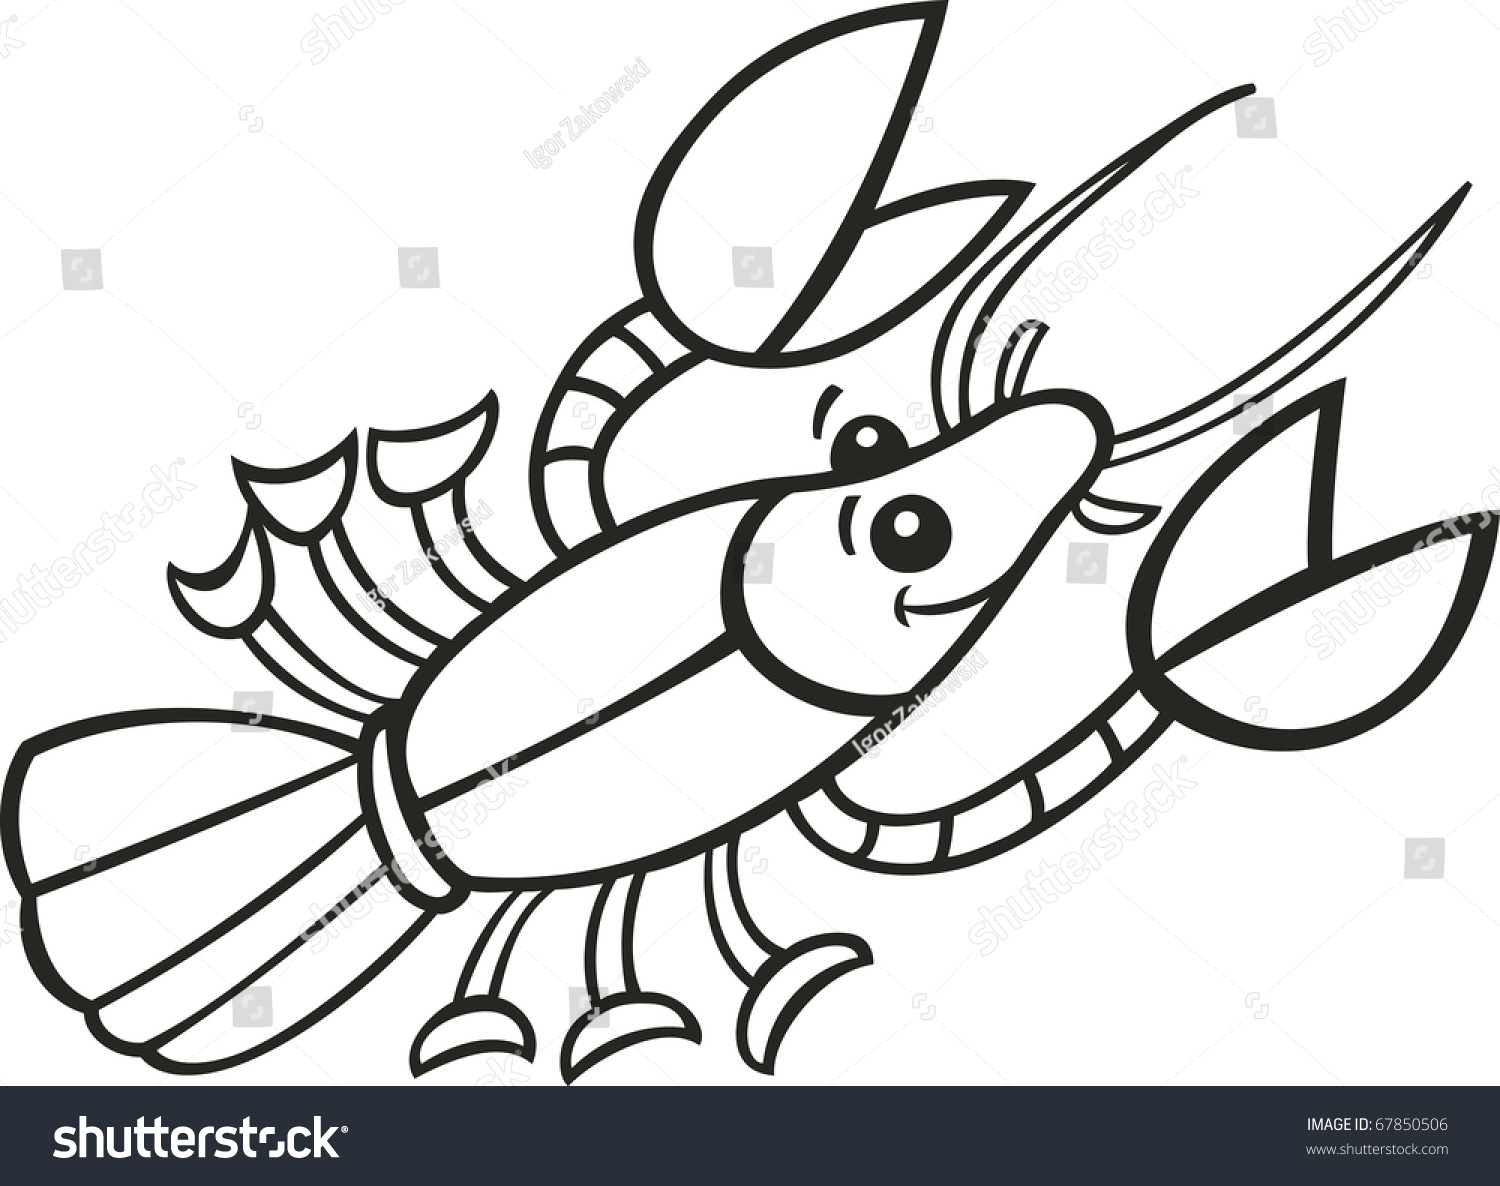 Illustration crayfish coloring book stock vector royalty free